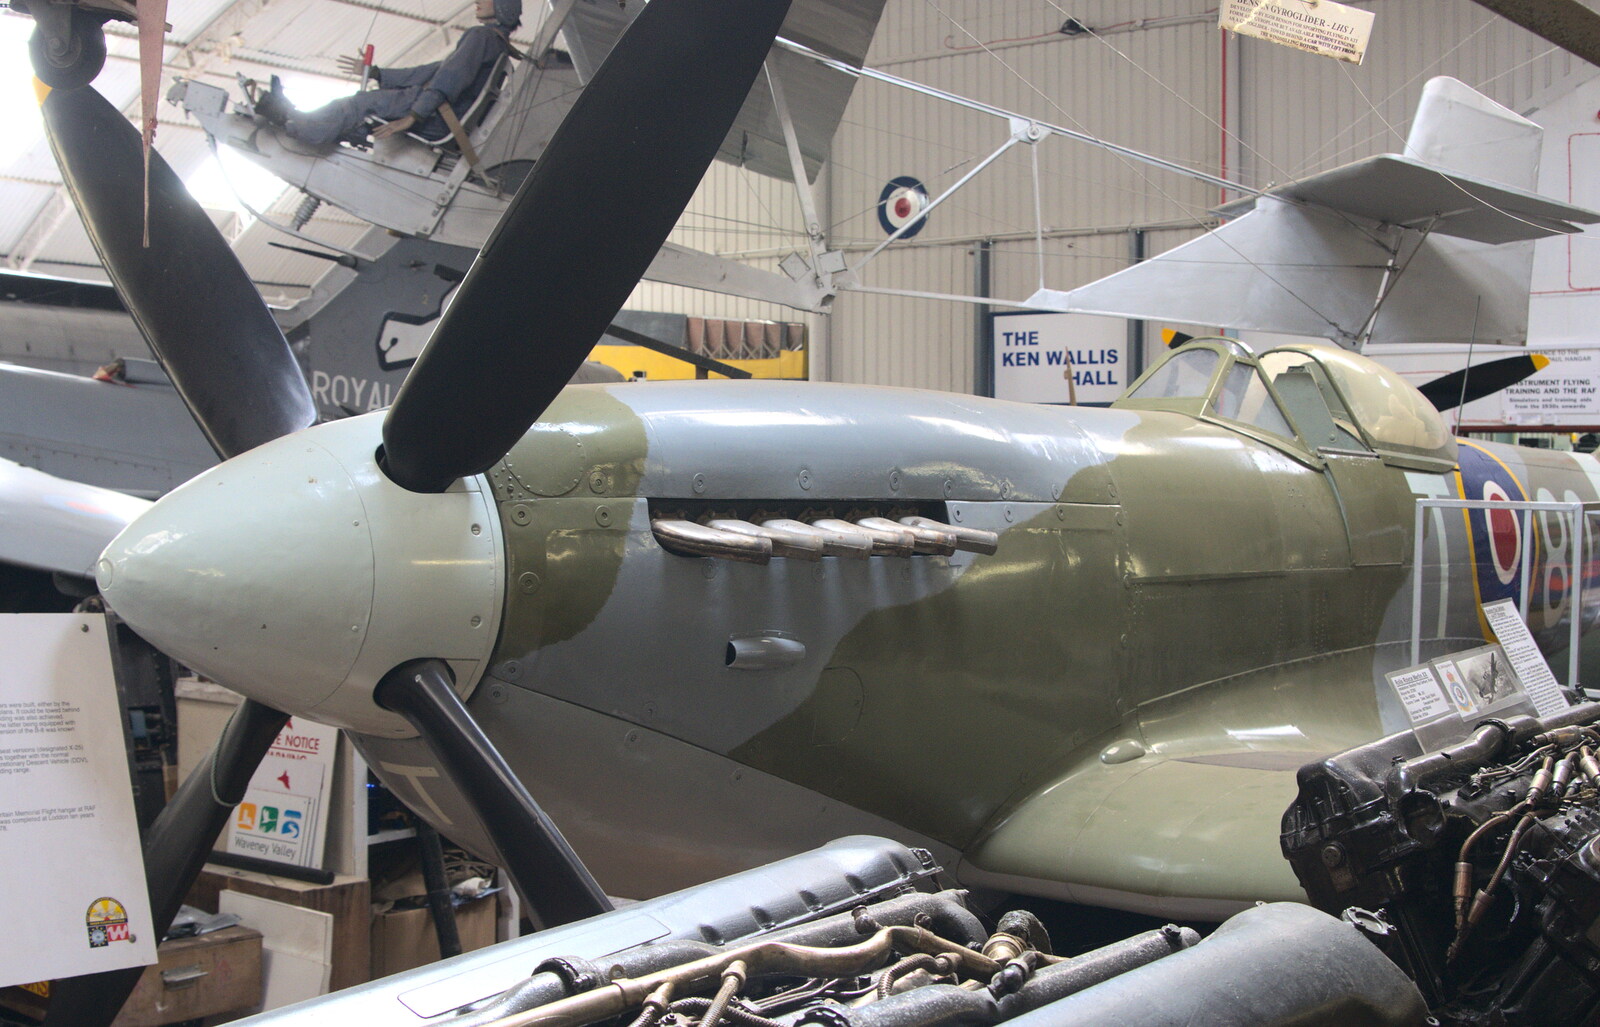 The front end of a Spitfire from Norfolk and Suffolk Aviation Museum, Flixton, Suffolk - 30th April 2017